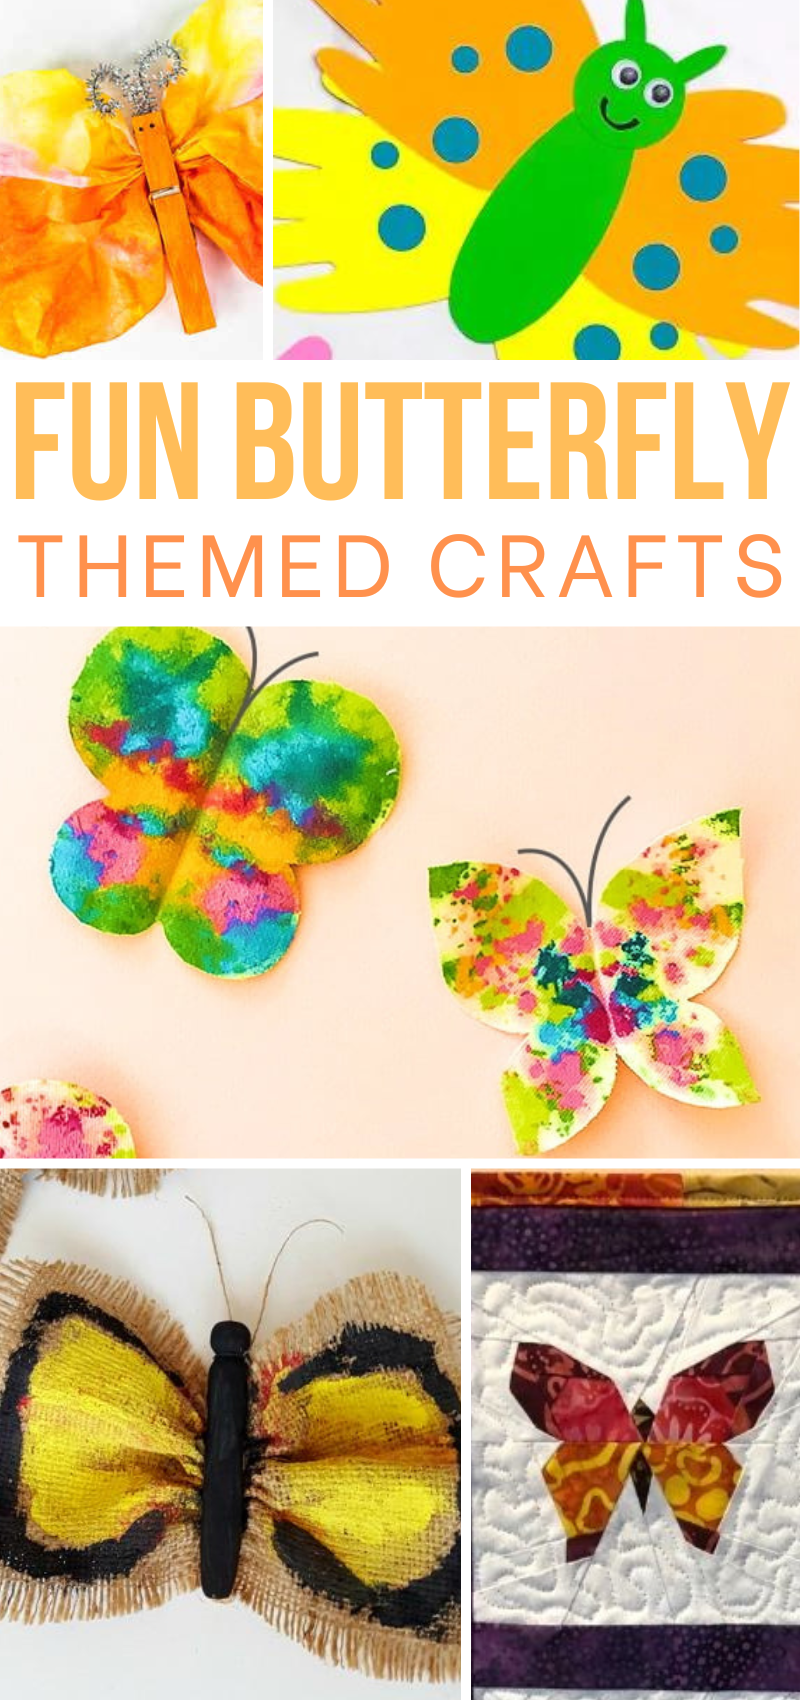 Butterfly Washi Tape Craft for Kids - Artsy Momma